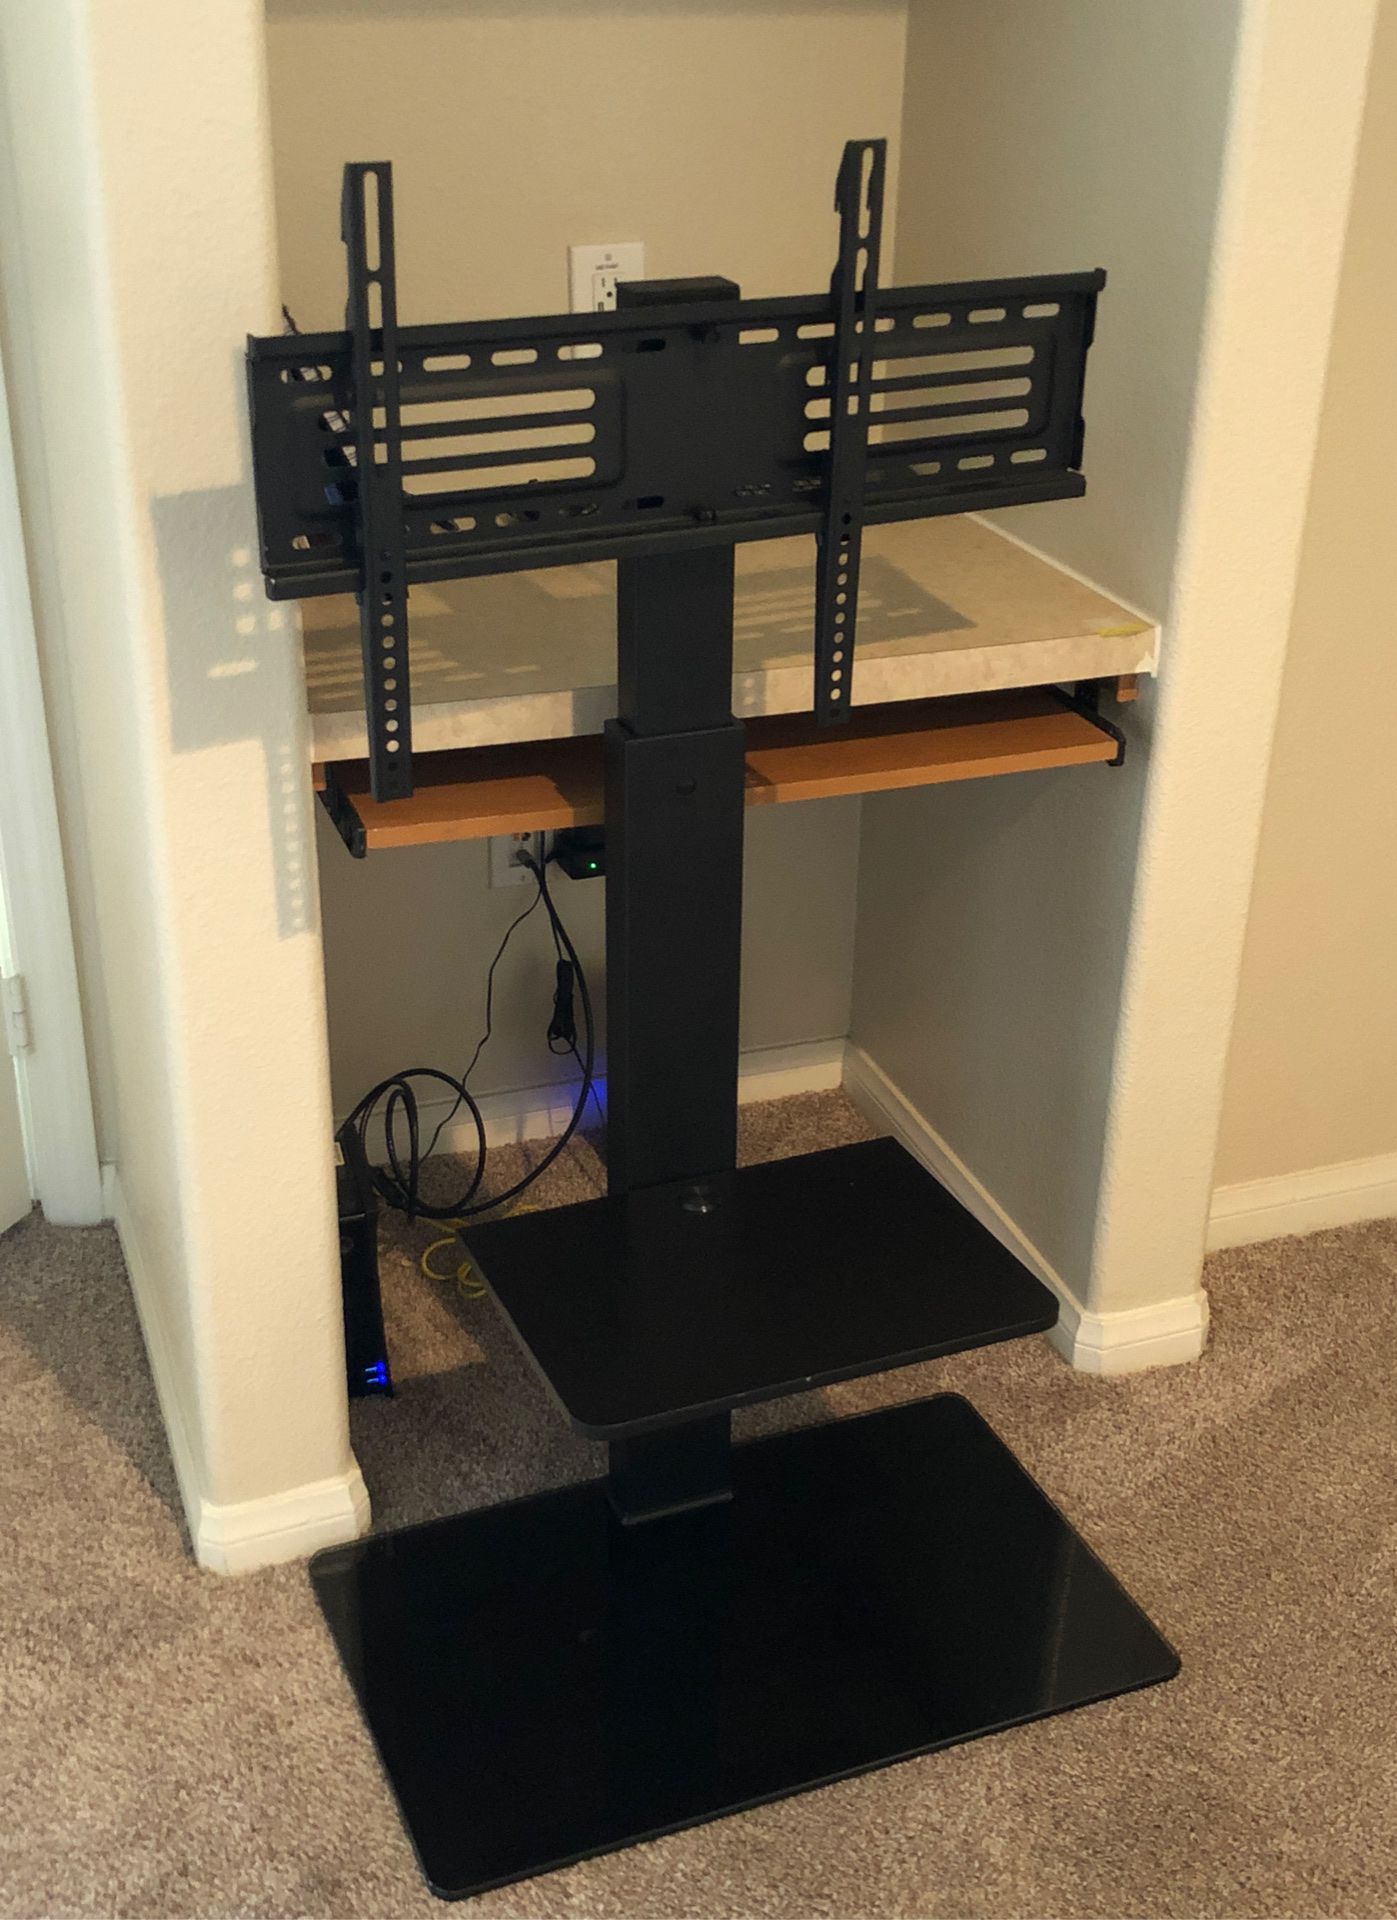 Tv stand holds up to 60 inches